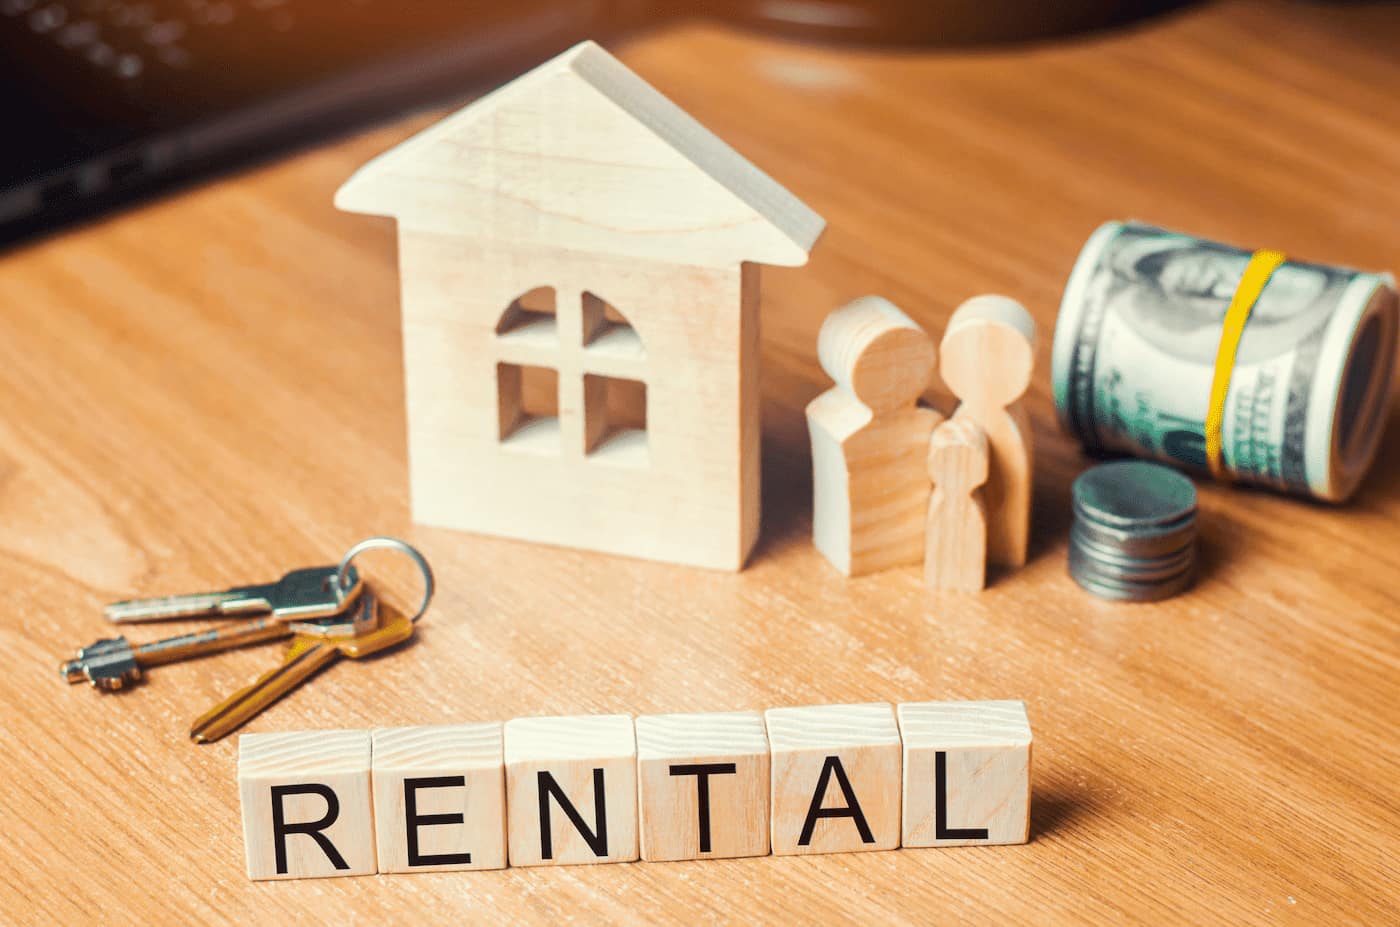 Rental Property Improvement Tips to Increase Value